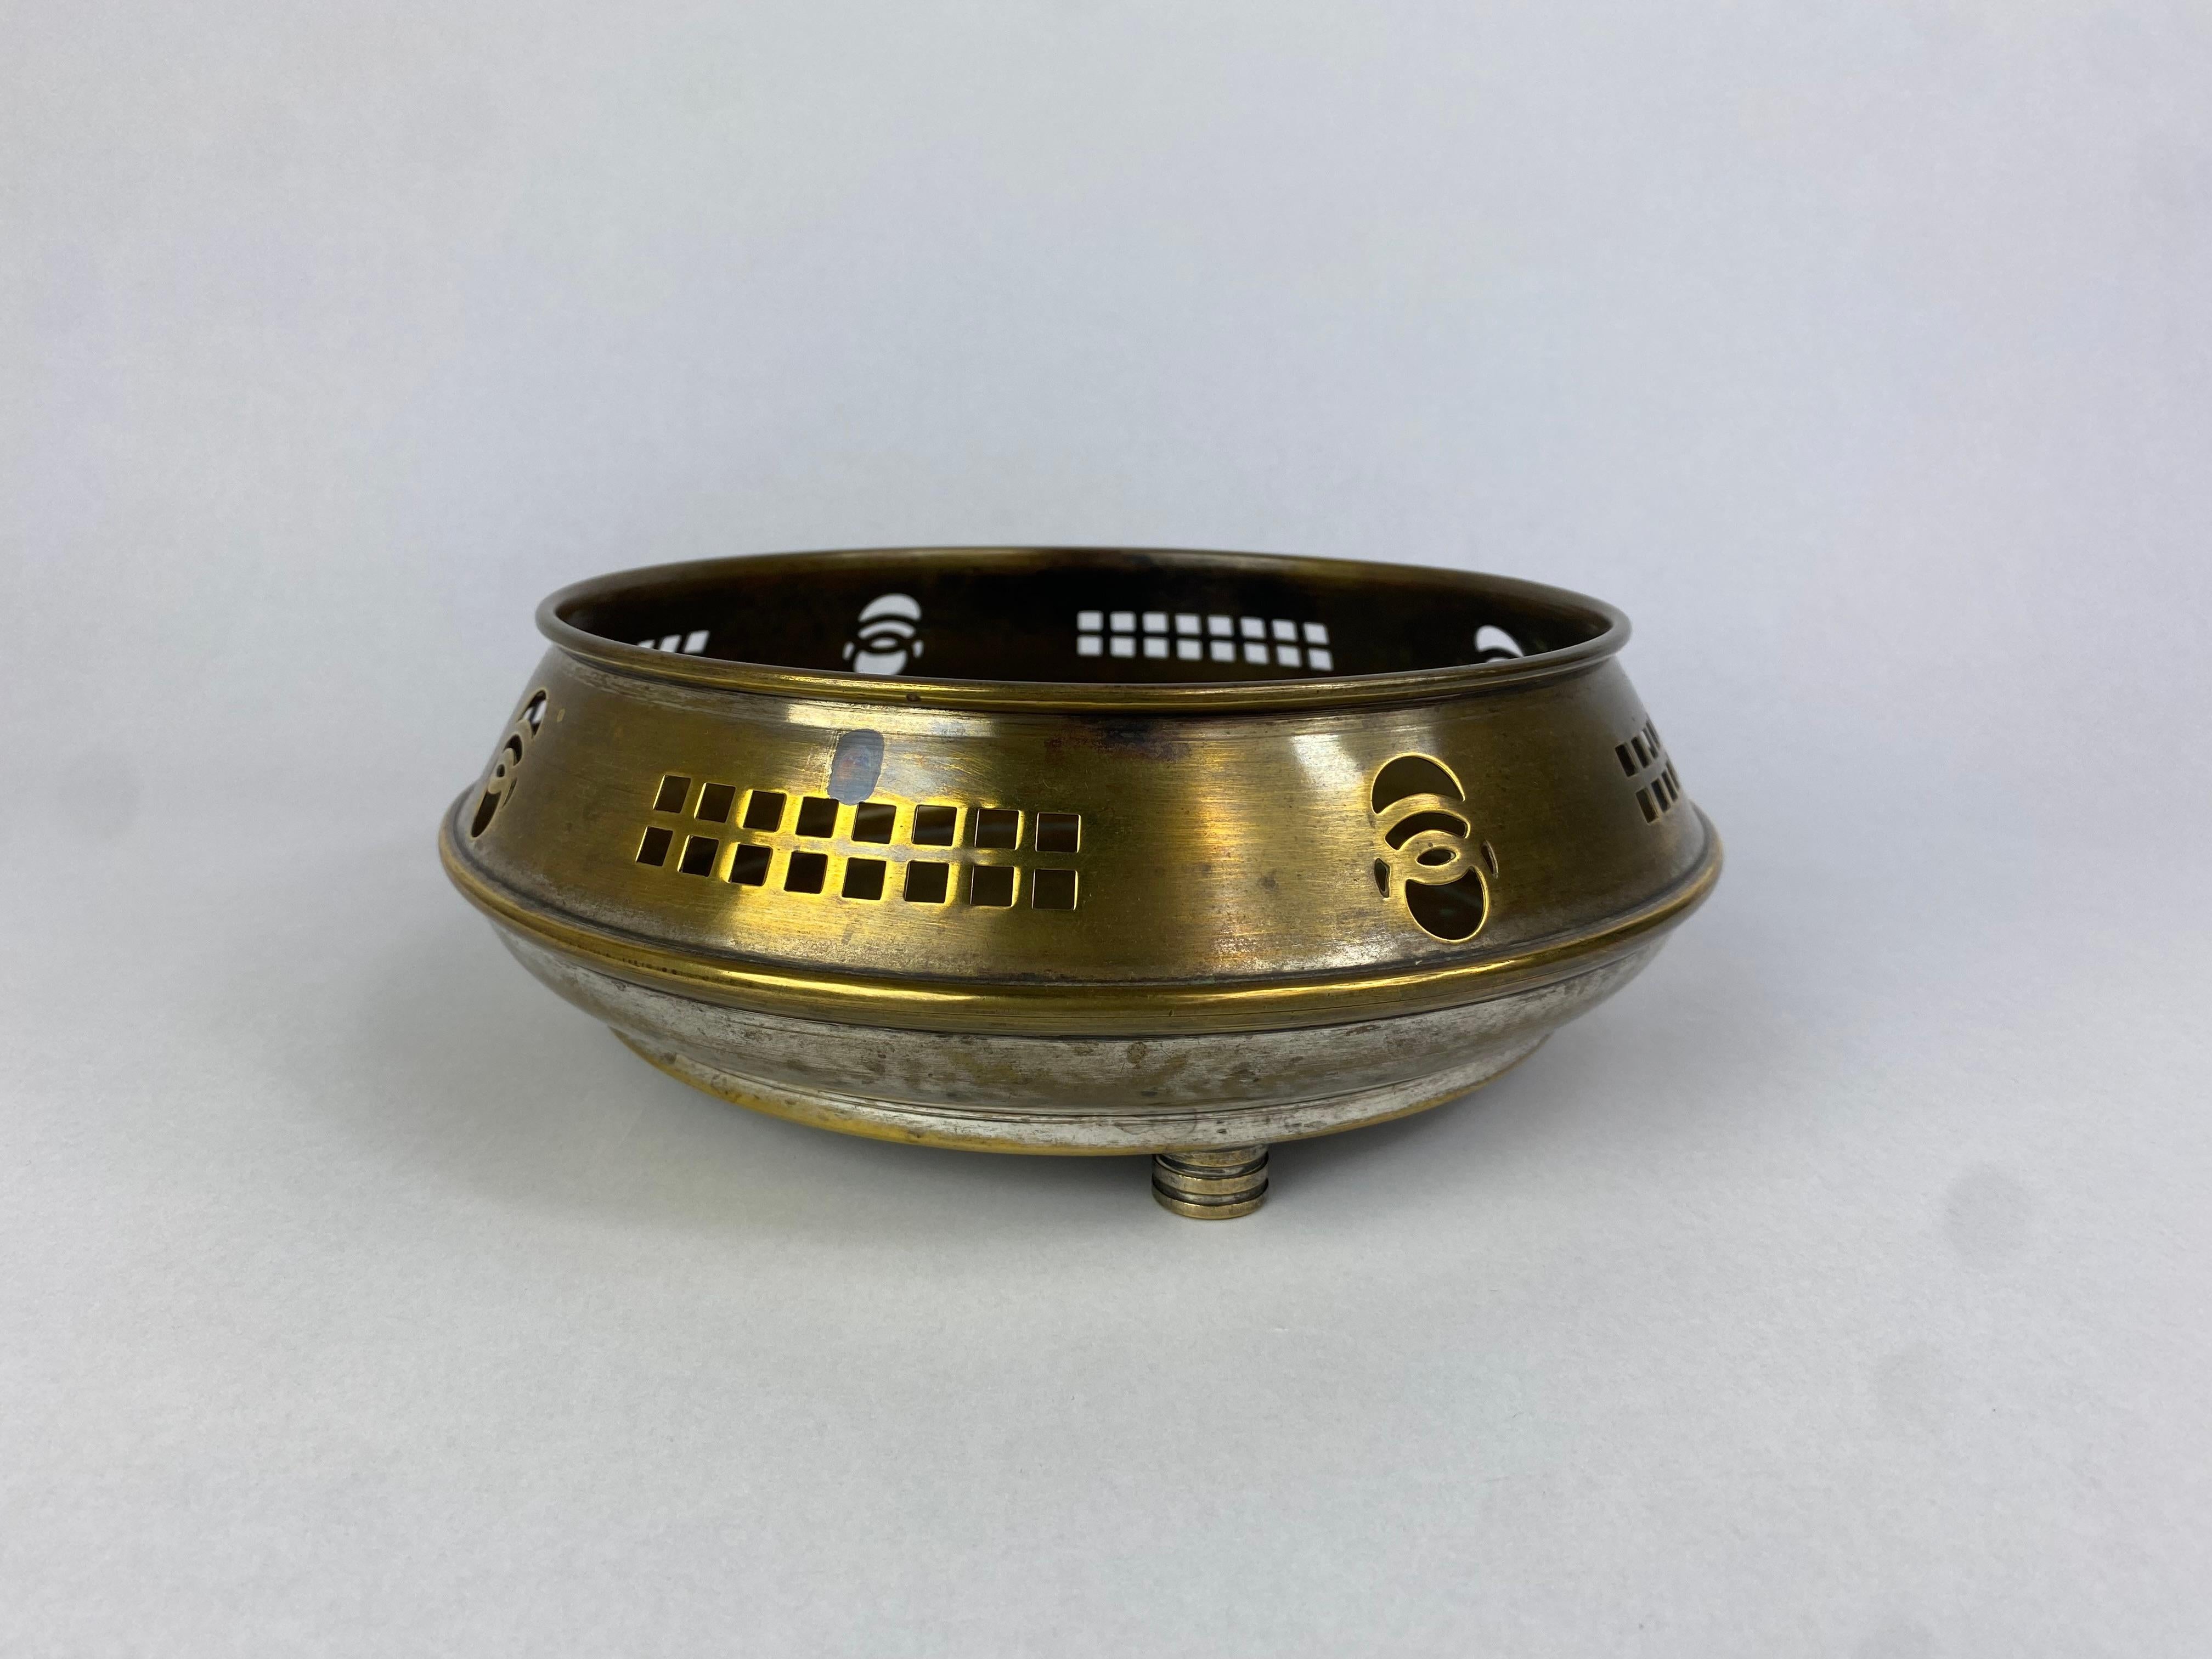 Secession brass bowl by Jutta Sika and Kolo Moser. Silverplated brass. Signed on the bottom by manufacturer W&G probably Wolkenstein & Glückseelig.